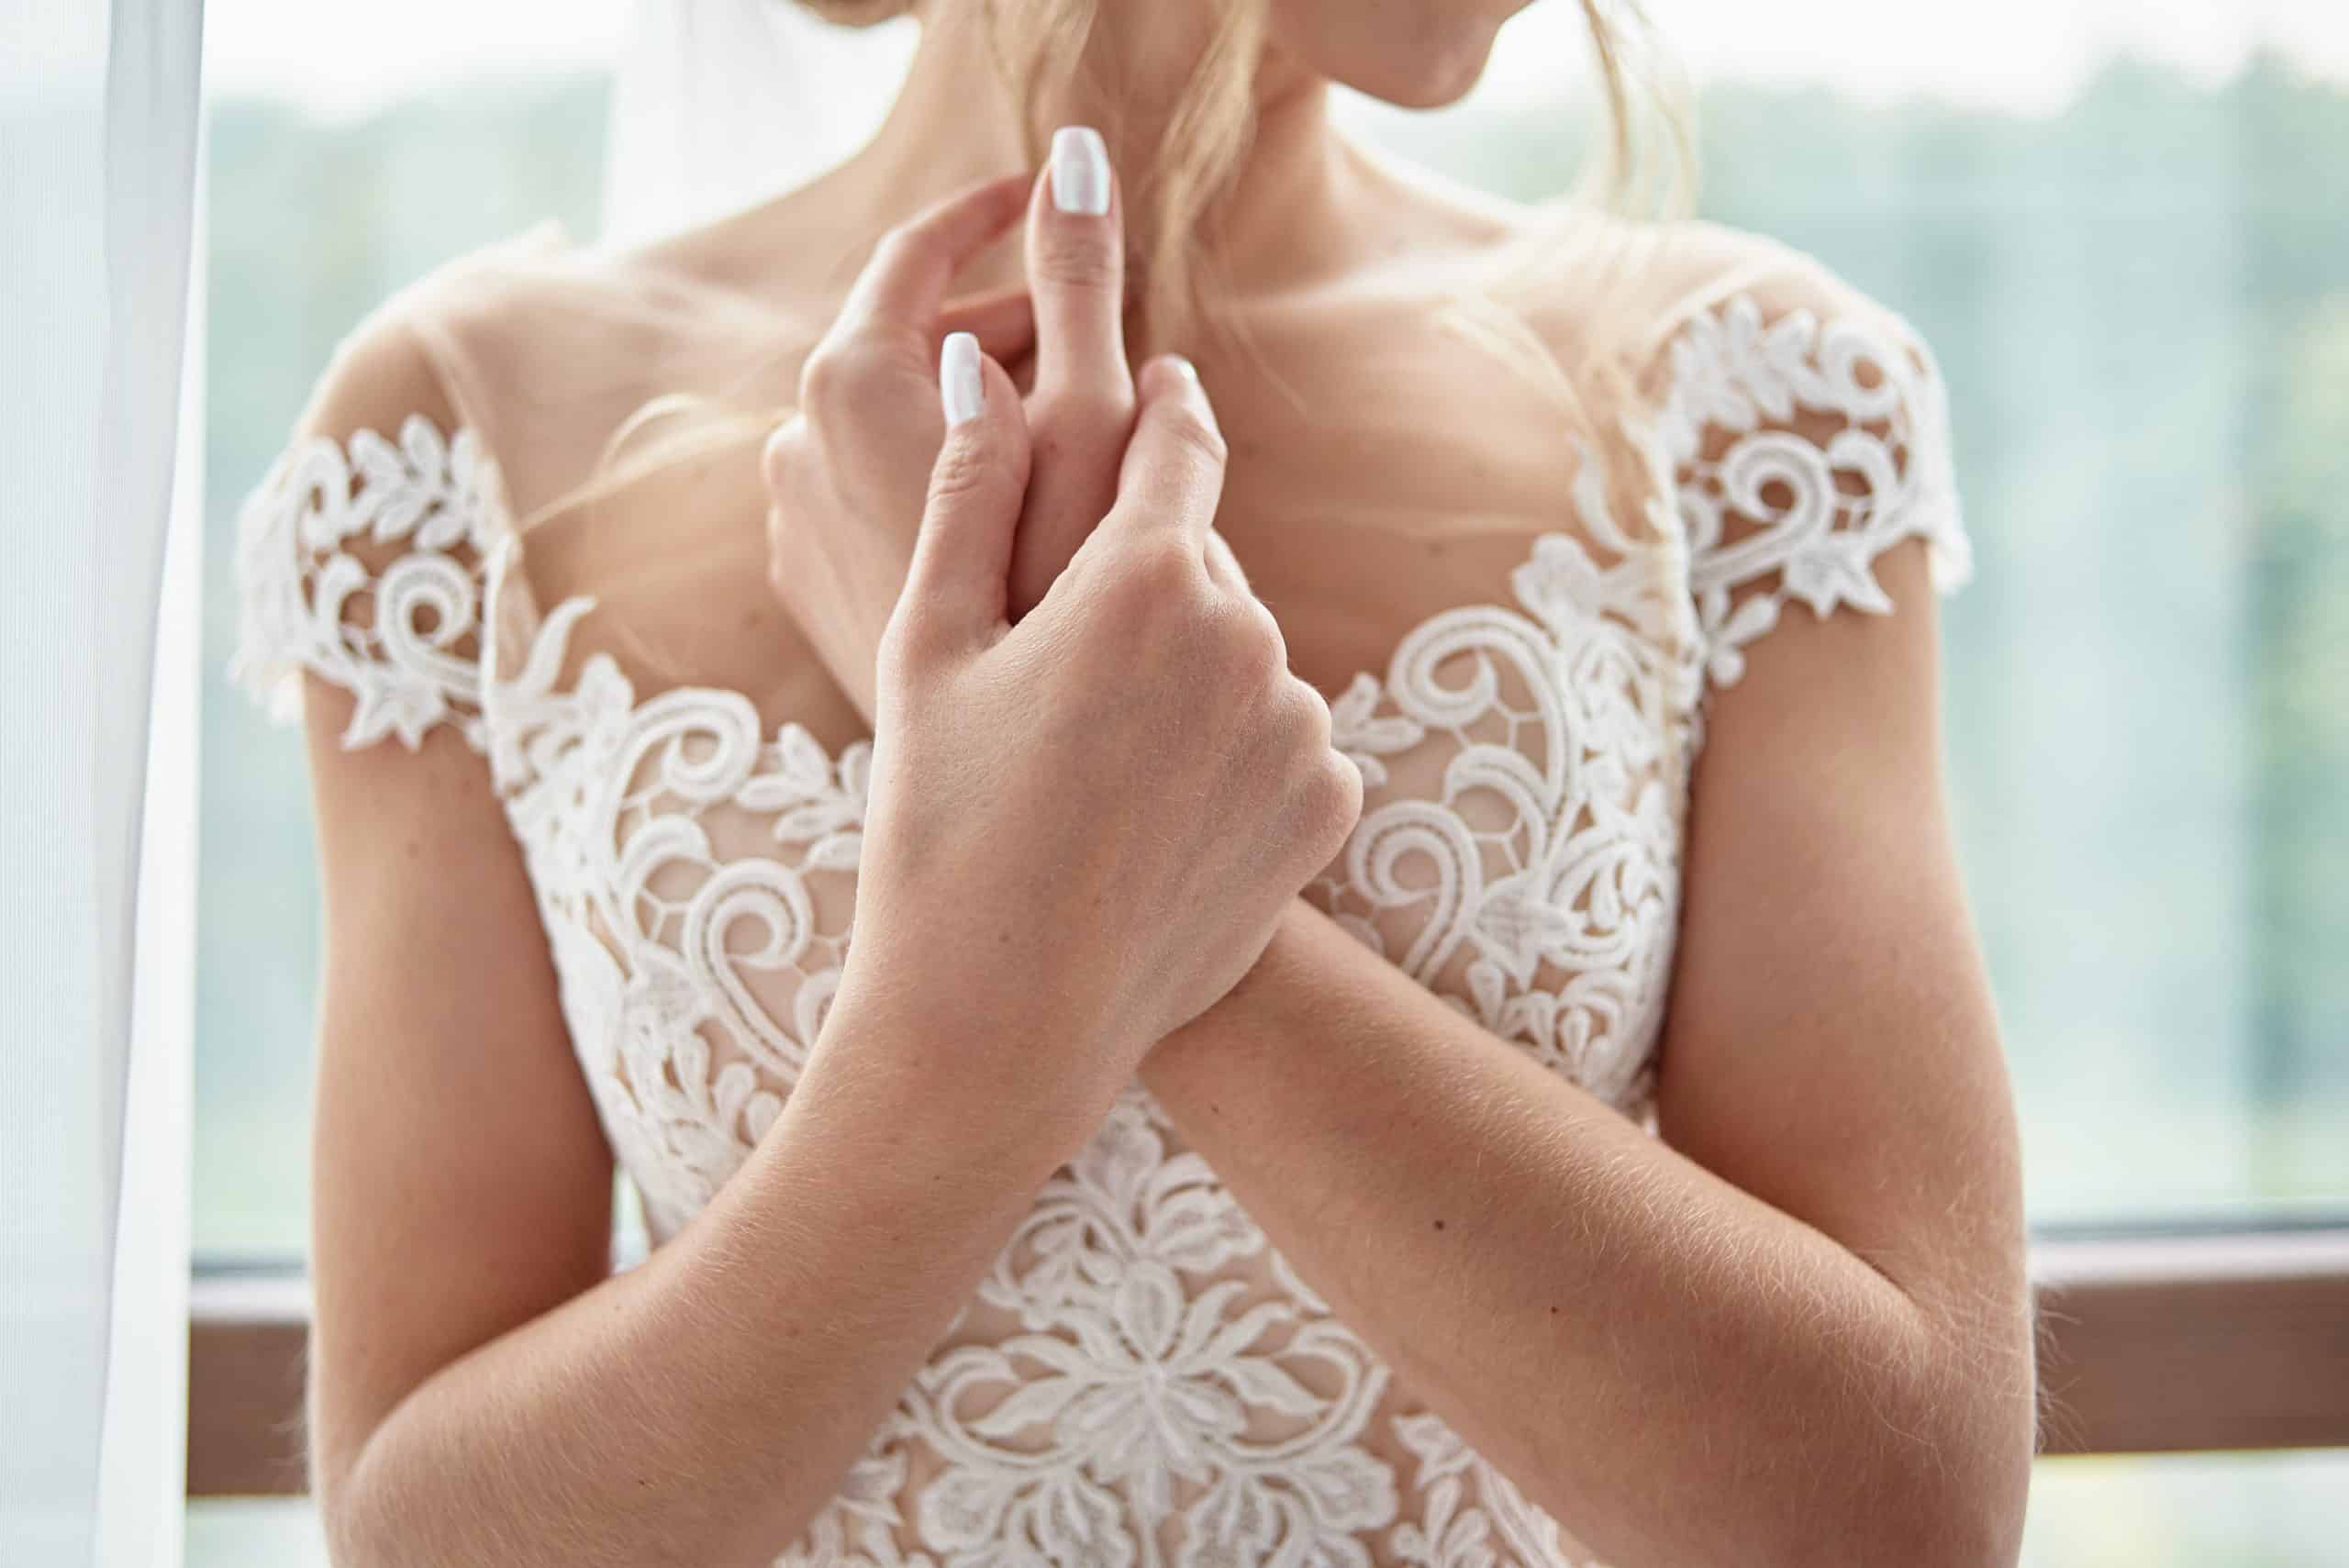 Bridal manicure – the most fashionable inspirations